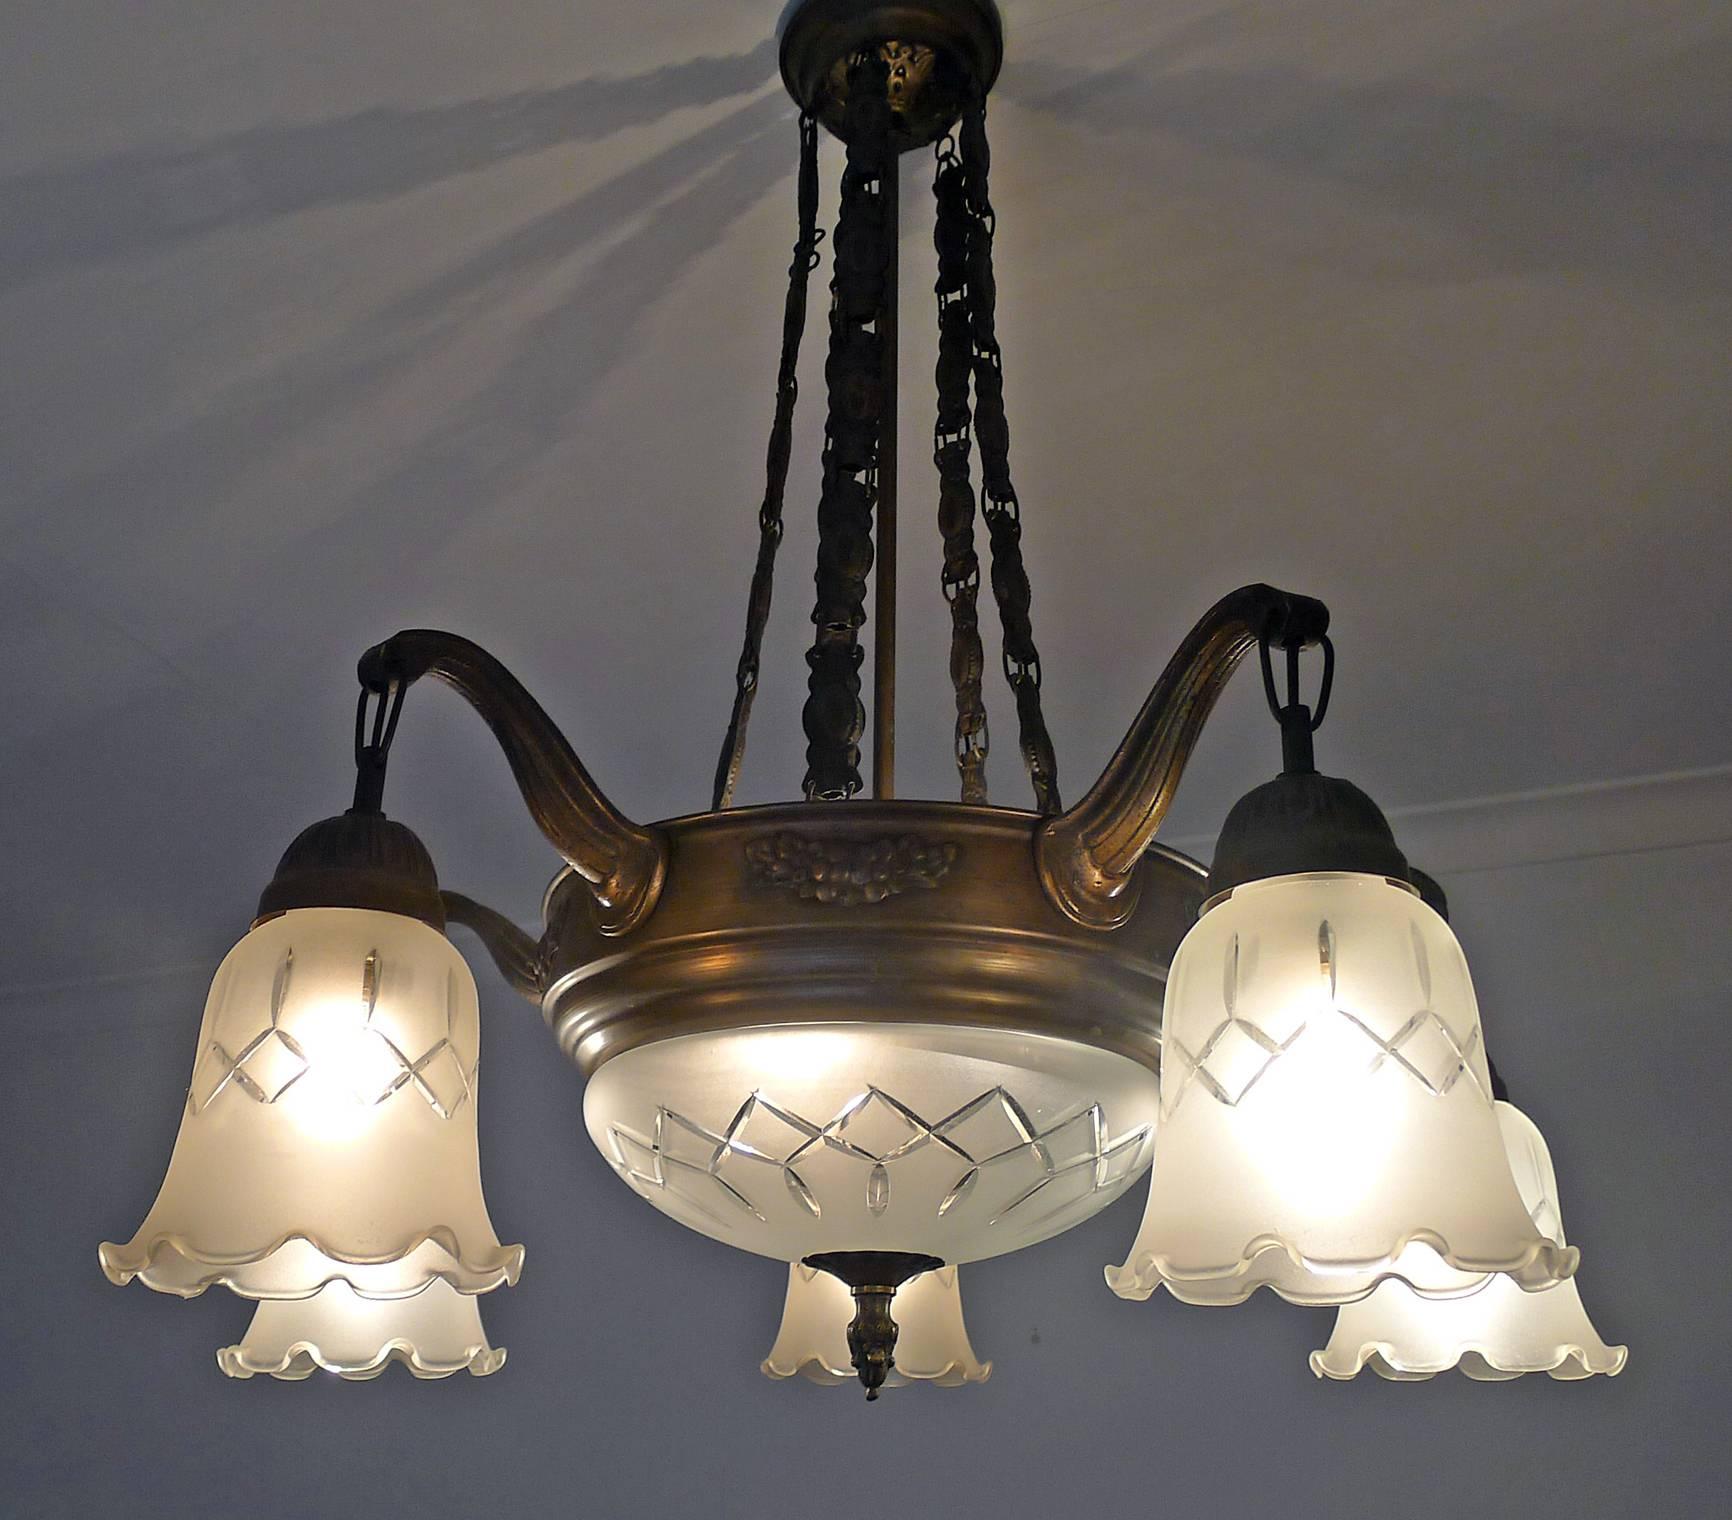 20th Century Antique French Art Deco and Art Nouveau Etched and Wheel Cut-Glass Chandelier